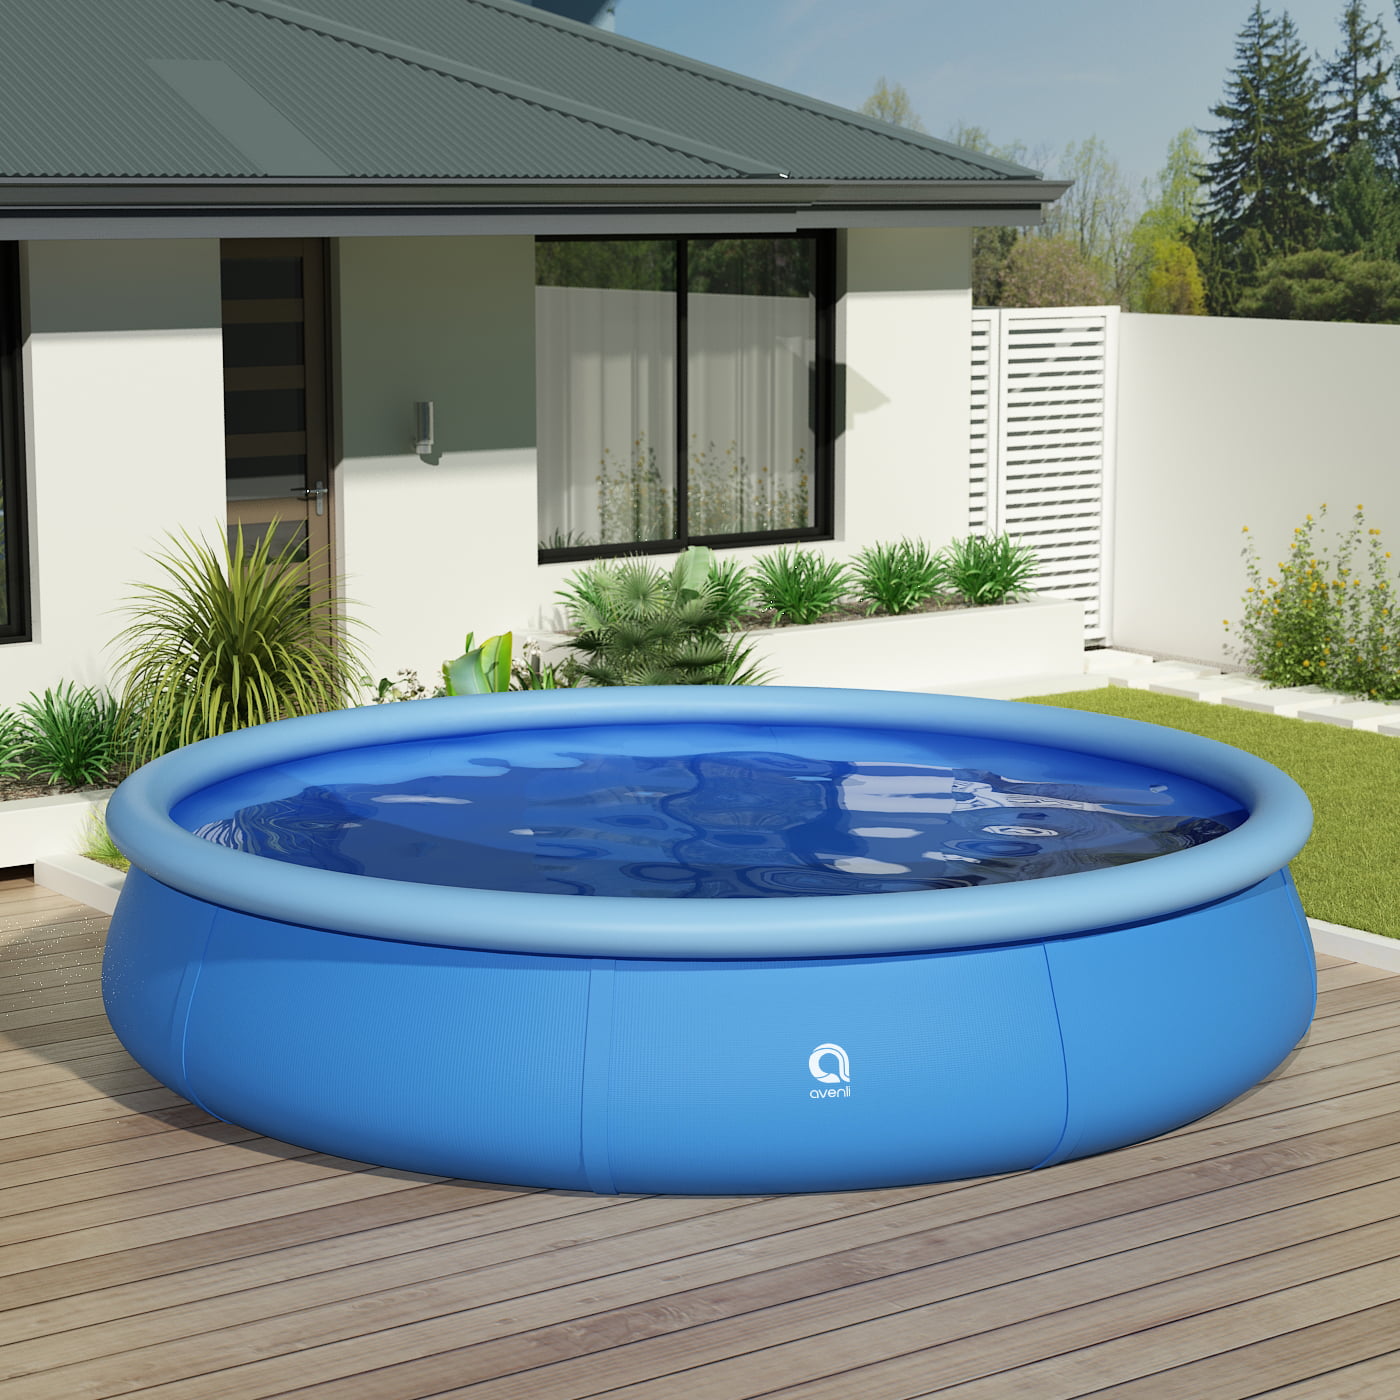 Inflatable Top Ring Swimming Pools Outdoor Garden Lawn Ground Set Round Swimming Pool L 12 ft W 79 in H 35.4 in Blue 